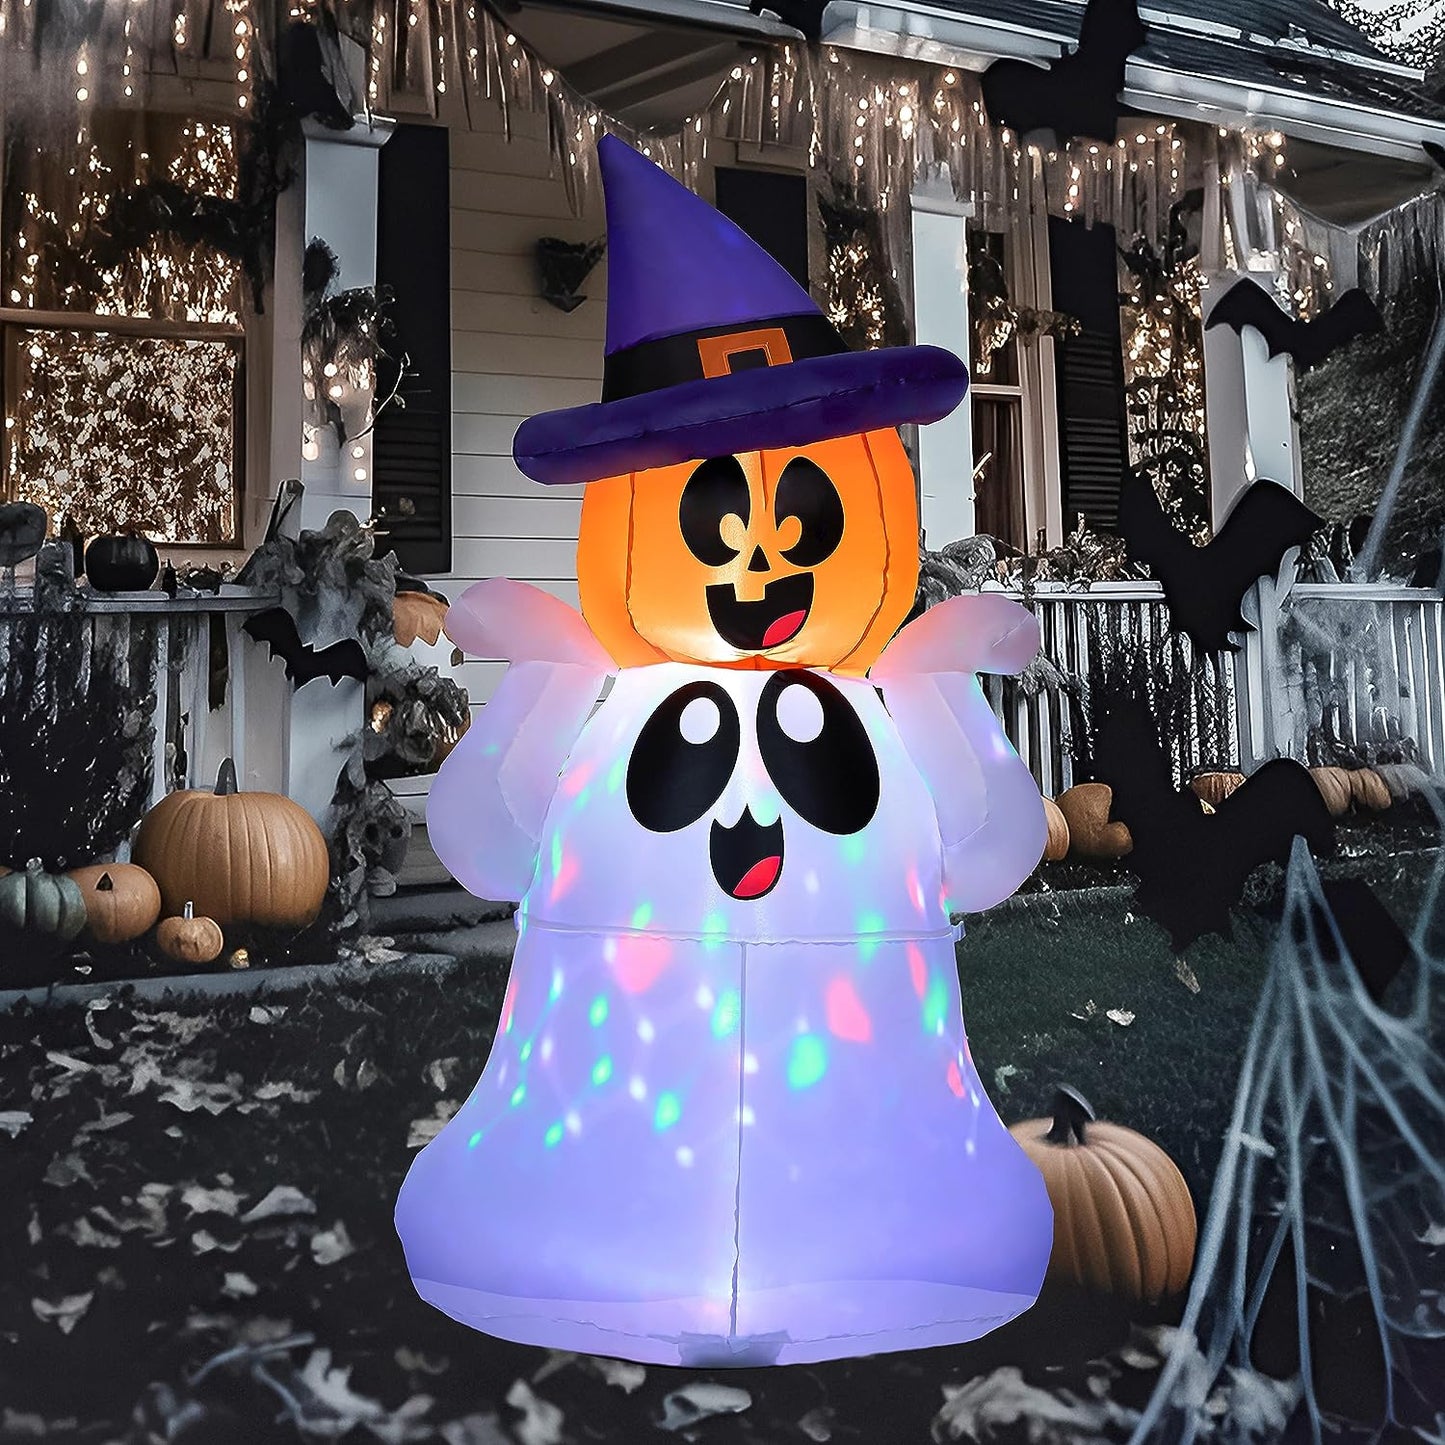 Joiedomi 5 FT Tall Halloween Inflatable Ghost with Pumpkin Head and Build-in Colorful LEDs